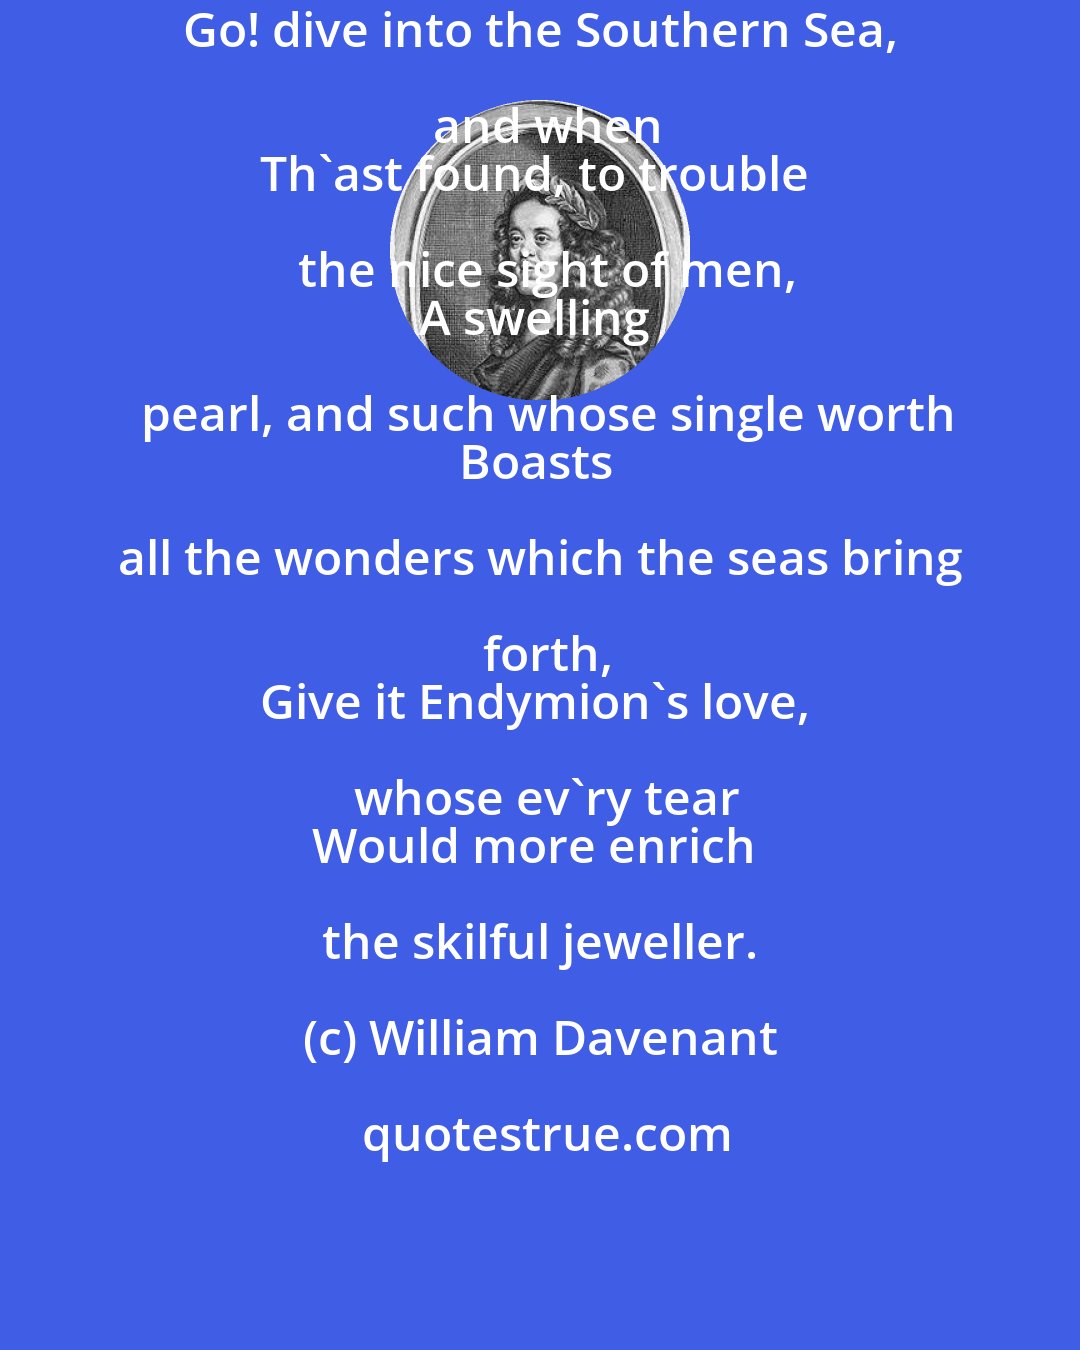 William Davenant: Go! dive into the Southern Sea, and when
Th'ast found, to trouble the nice sight of men,
A swelling pearl, and such whose single worth
Boasts all the wonders which the seas bring forth,
Give it Endymion's love, whose ev'ry tear
Would more enrich the skilful jeweller.